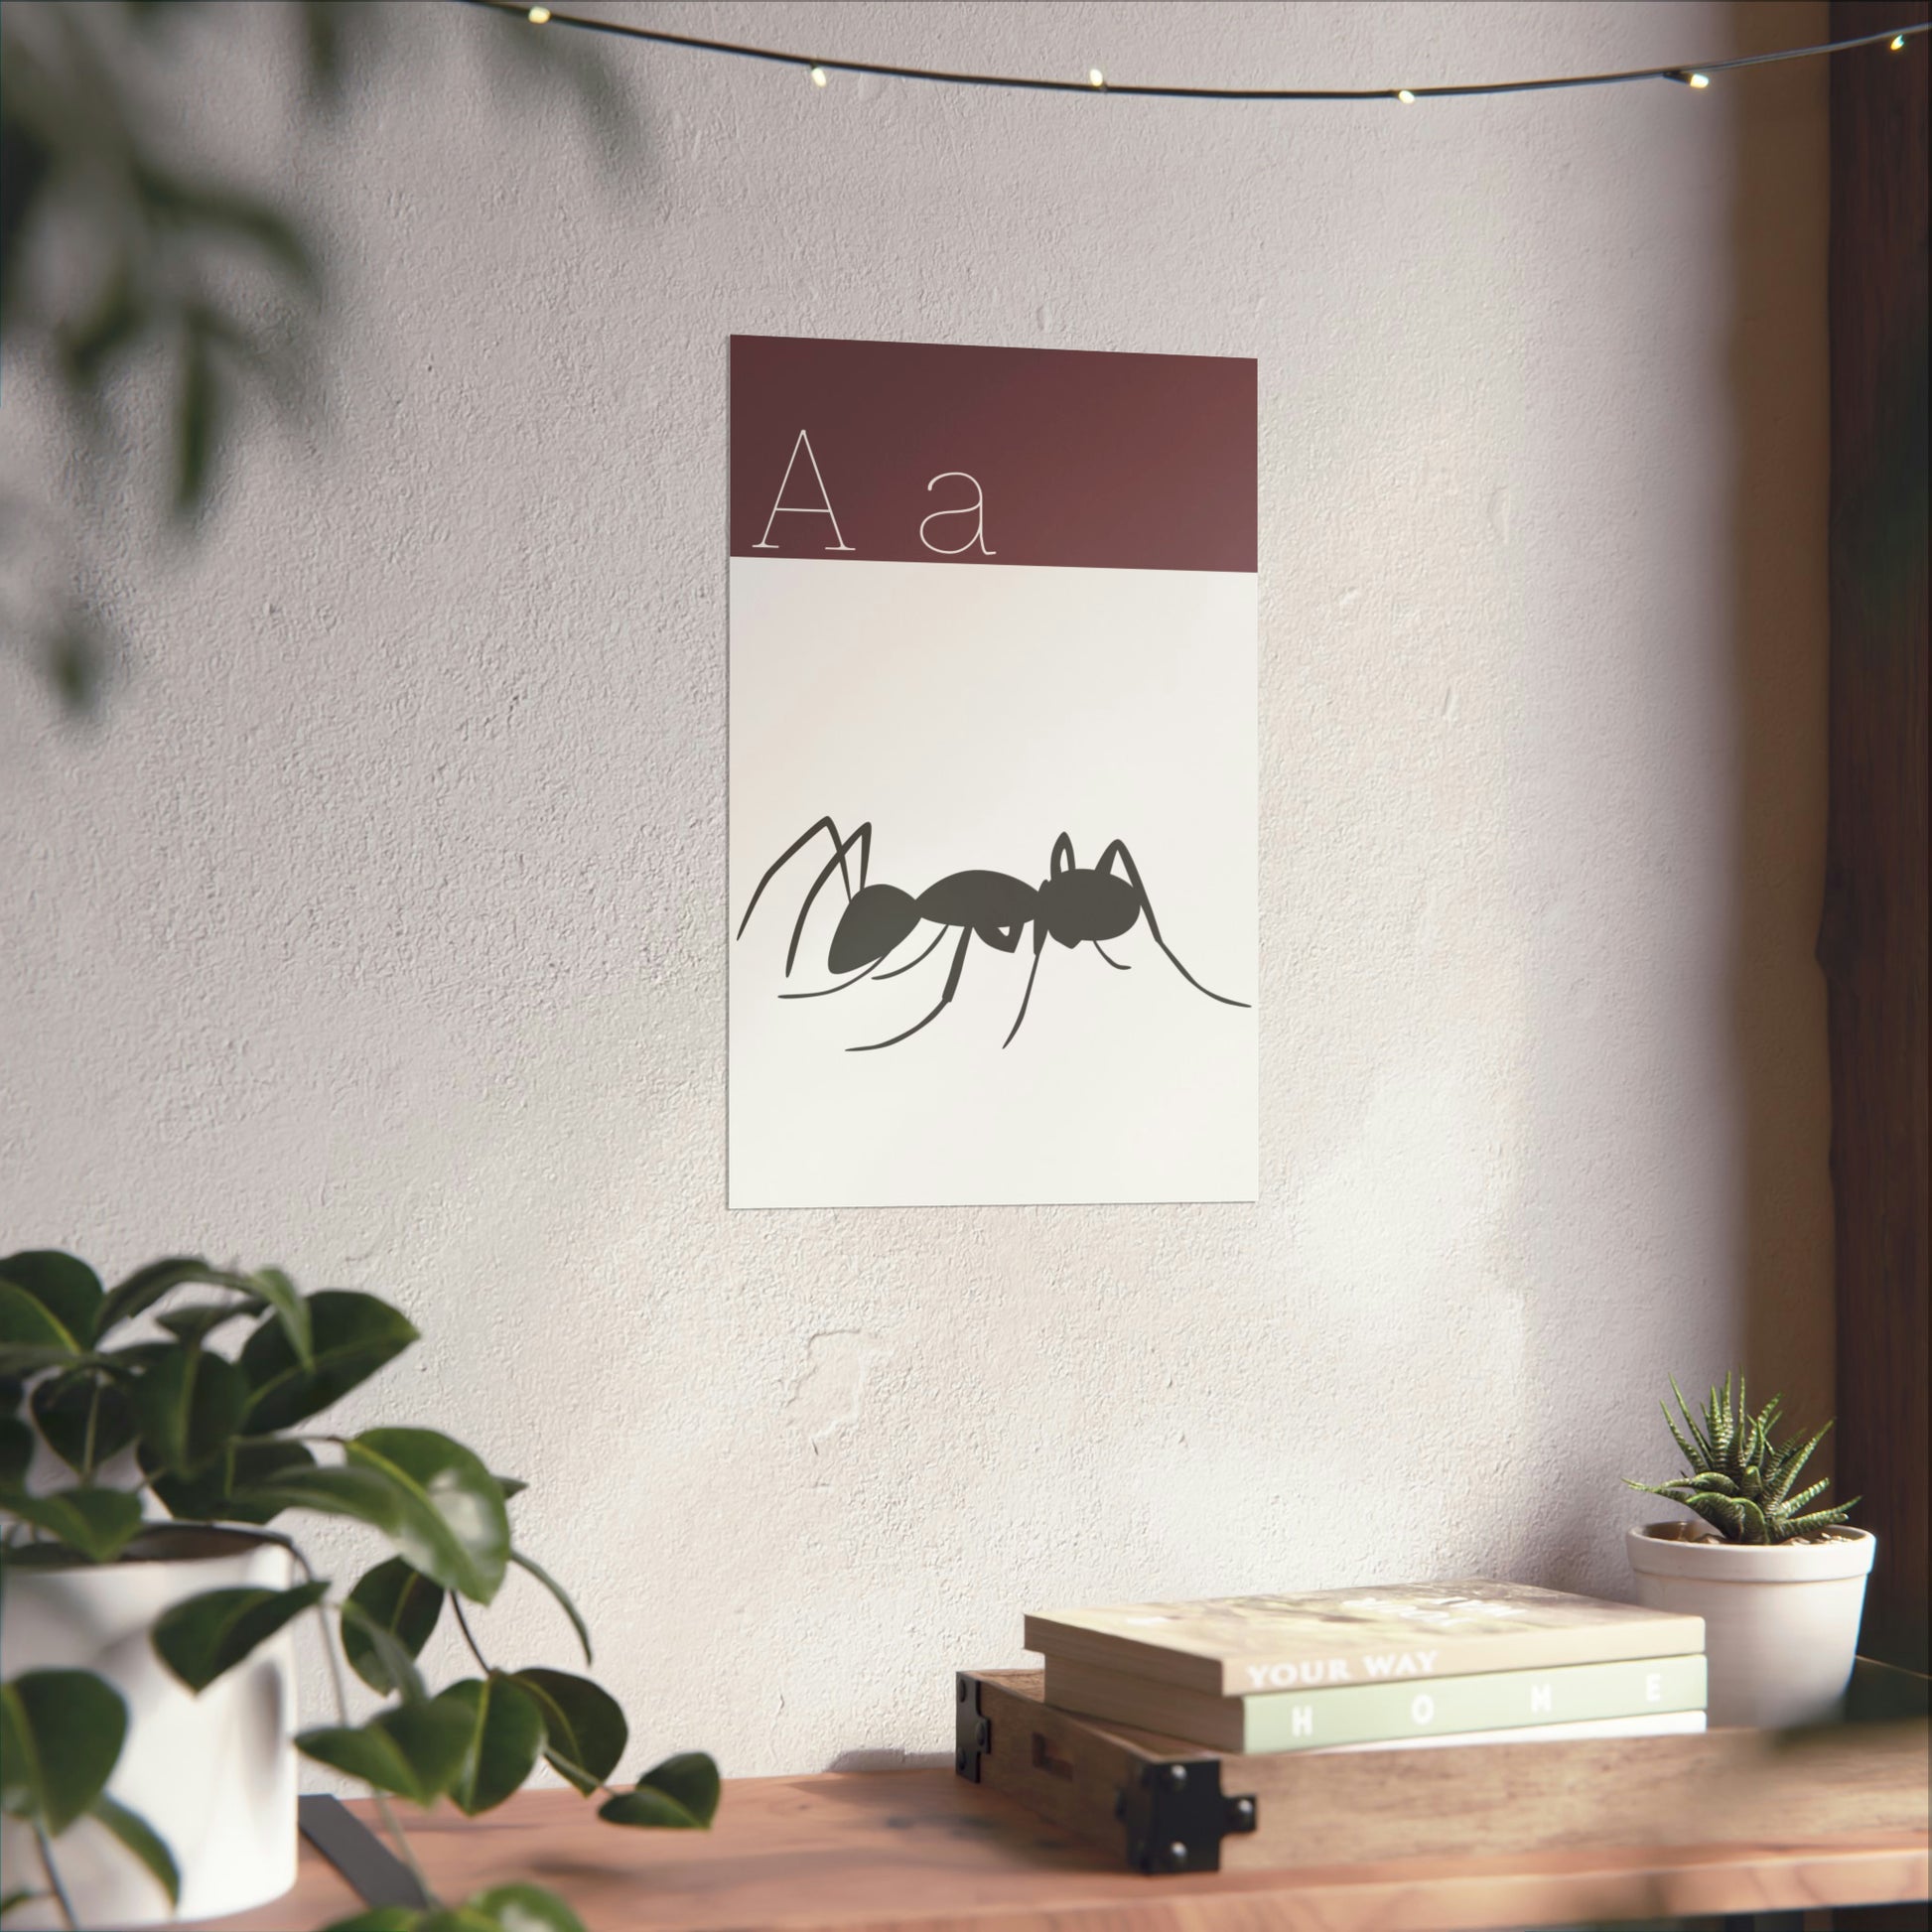 Ant Poster on a White Wall with. a Plant and books